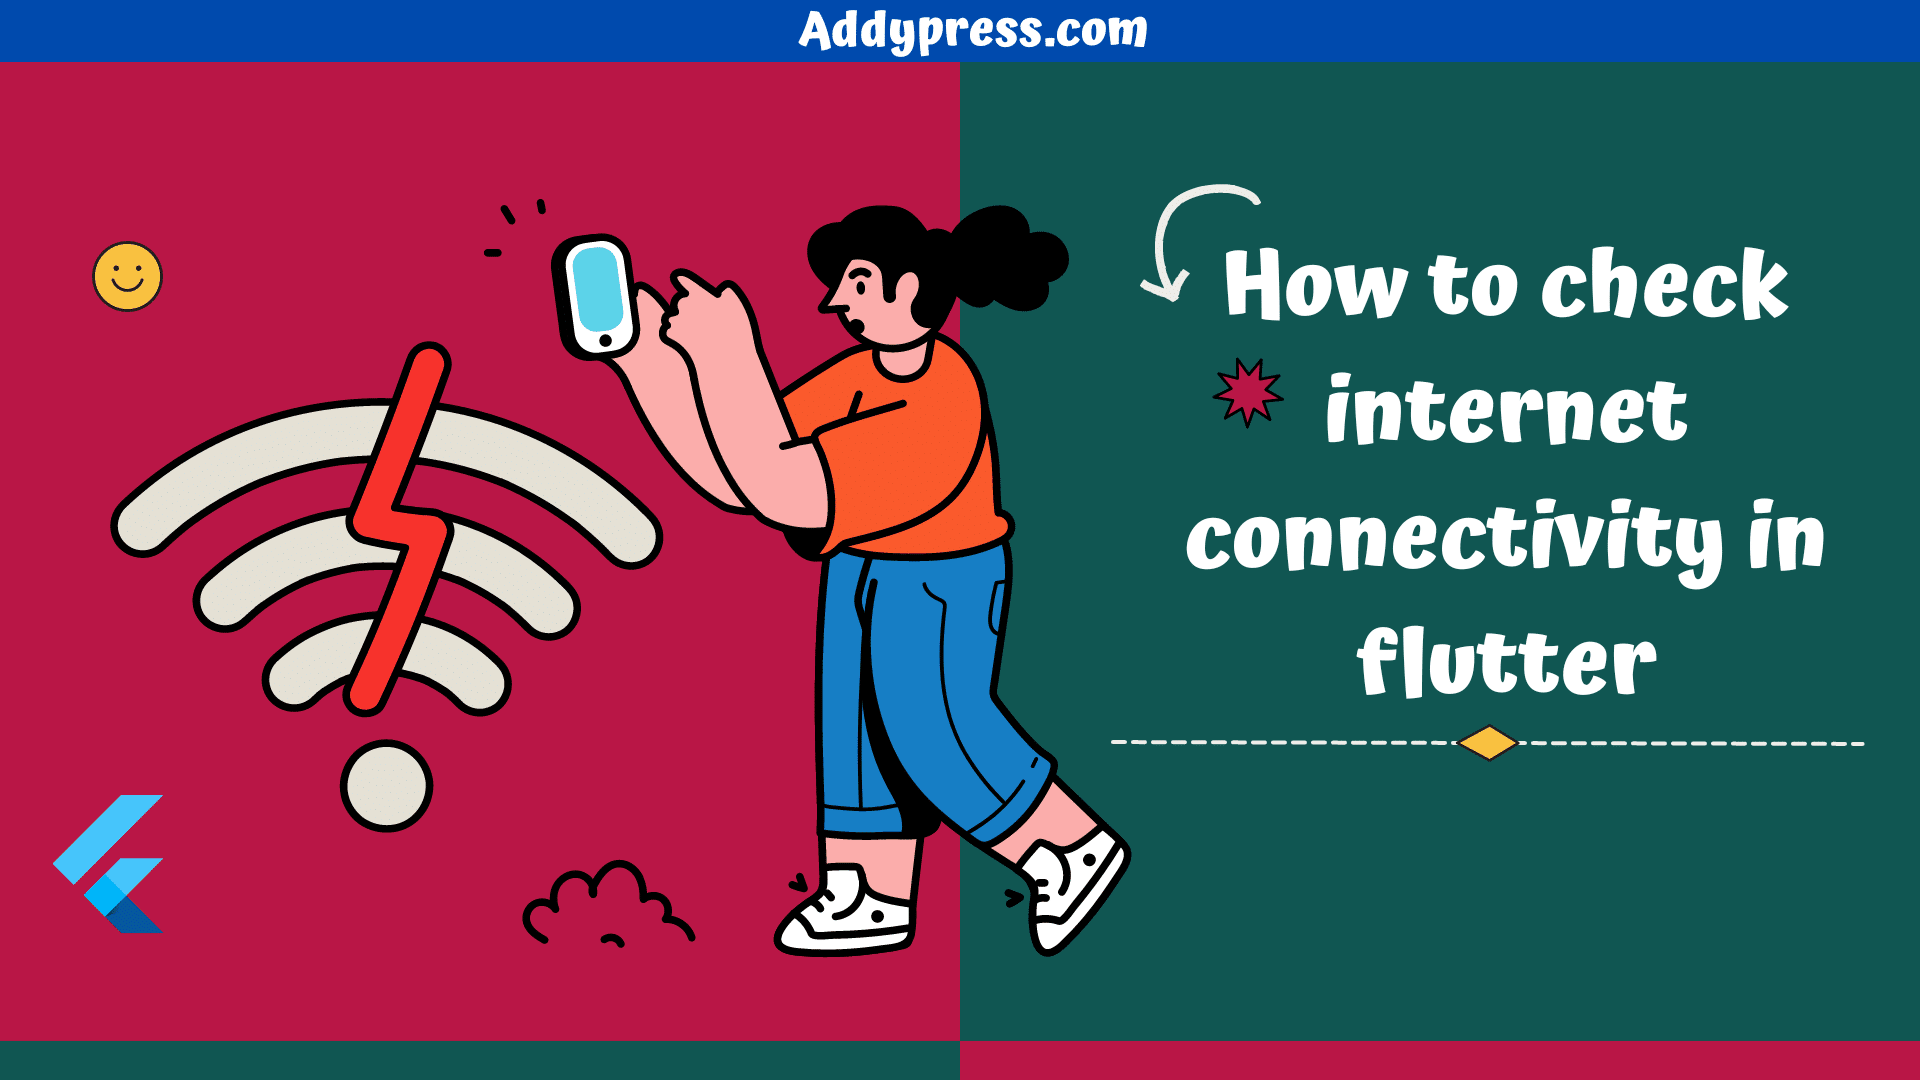 How to check internet connectivity in flutter